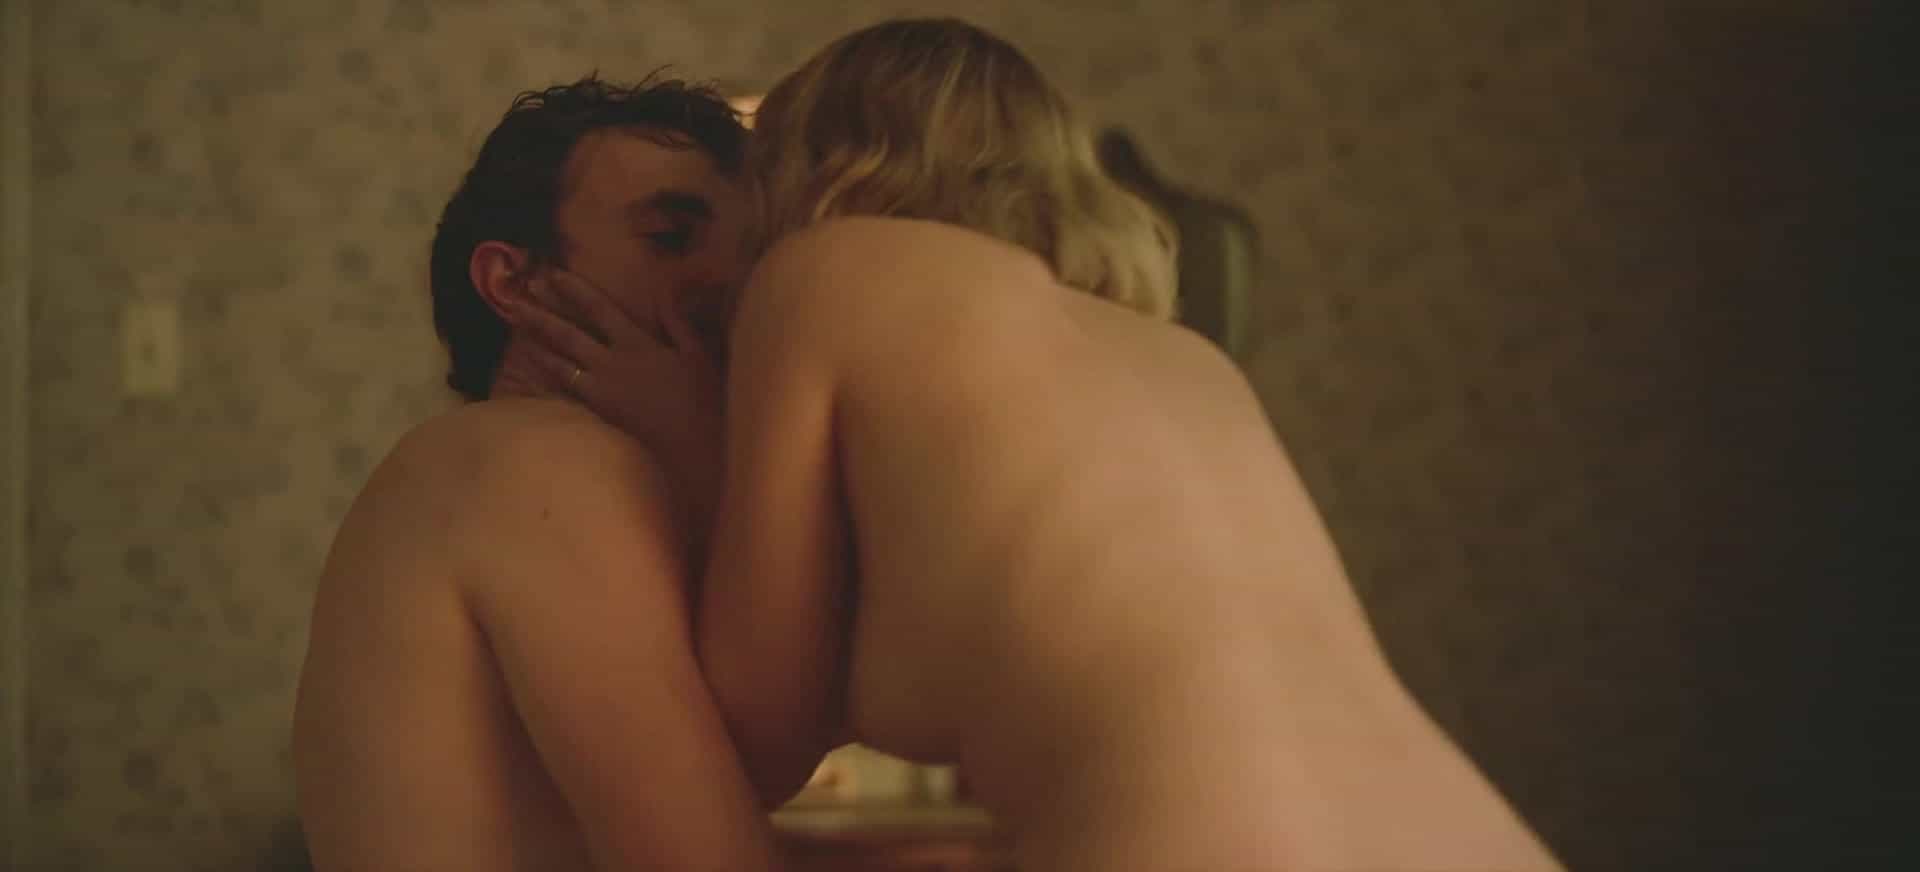 Saoirse Ronan's new nude scenes have me incredibly excited